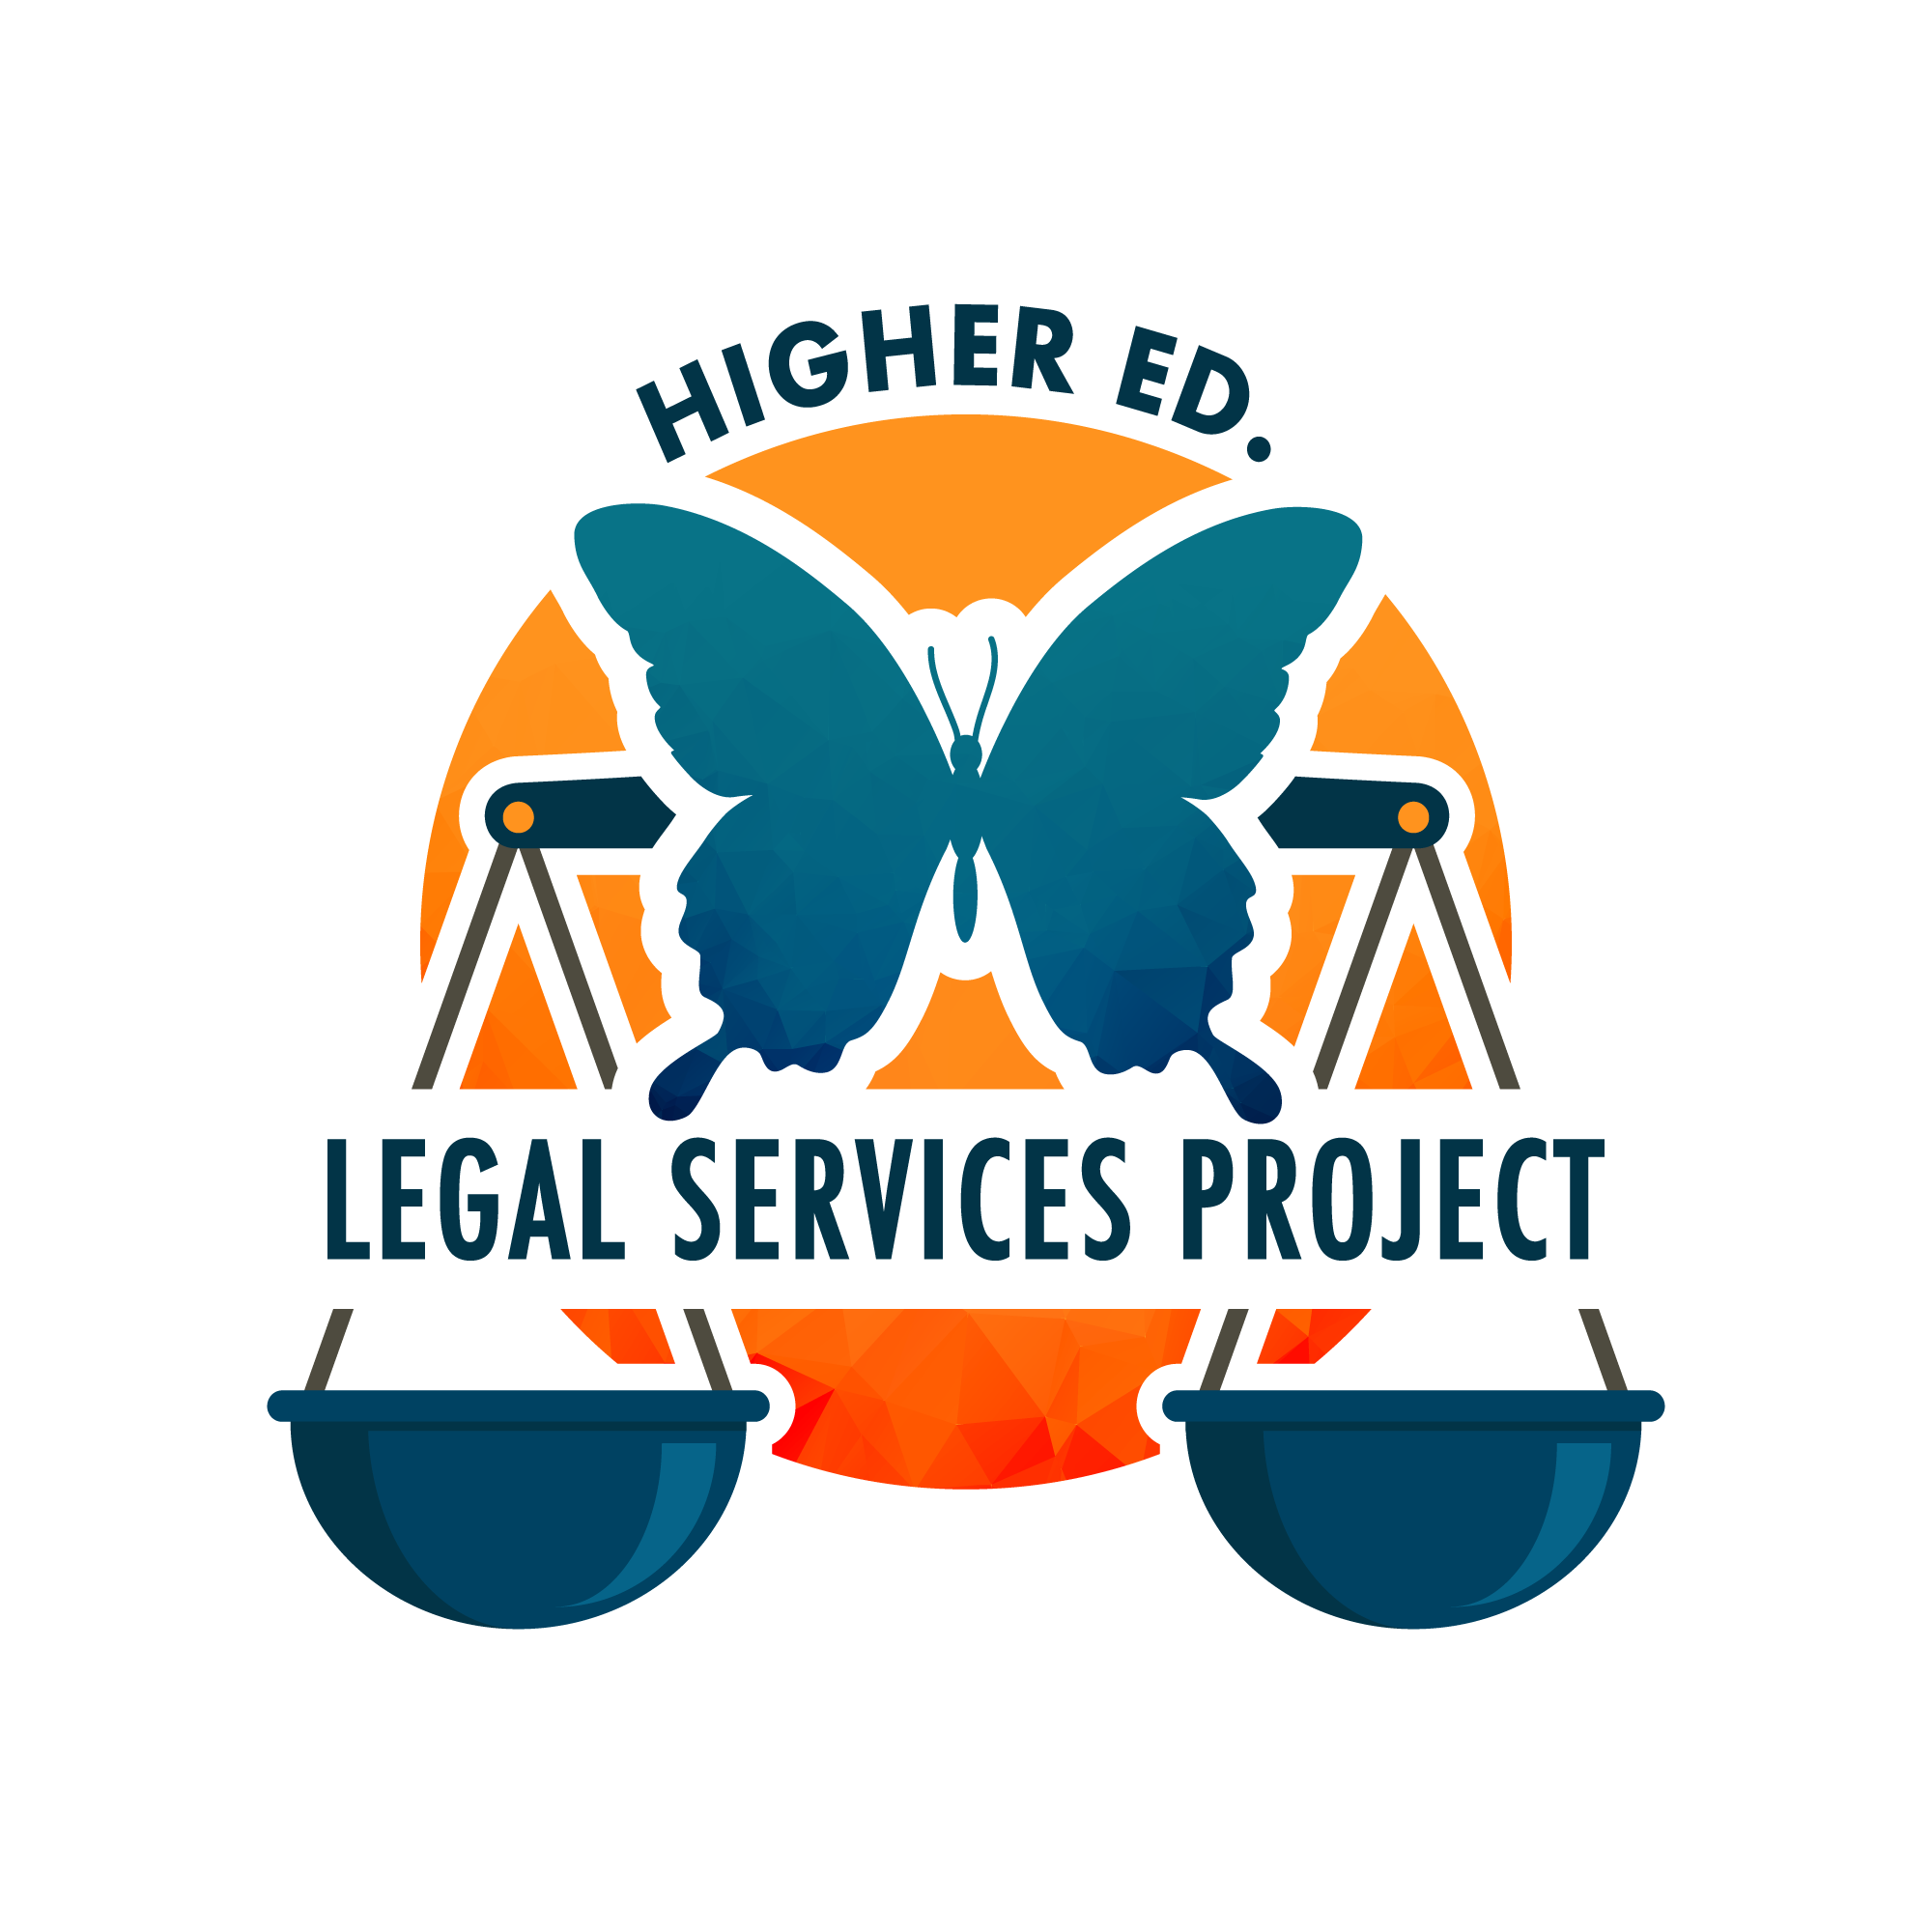 Higher Ed. Legal Services Project